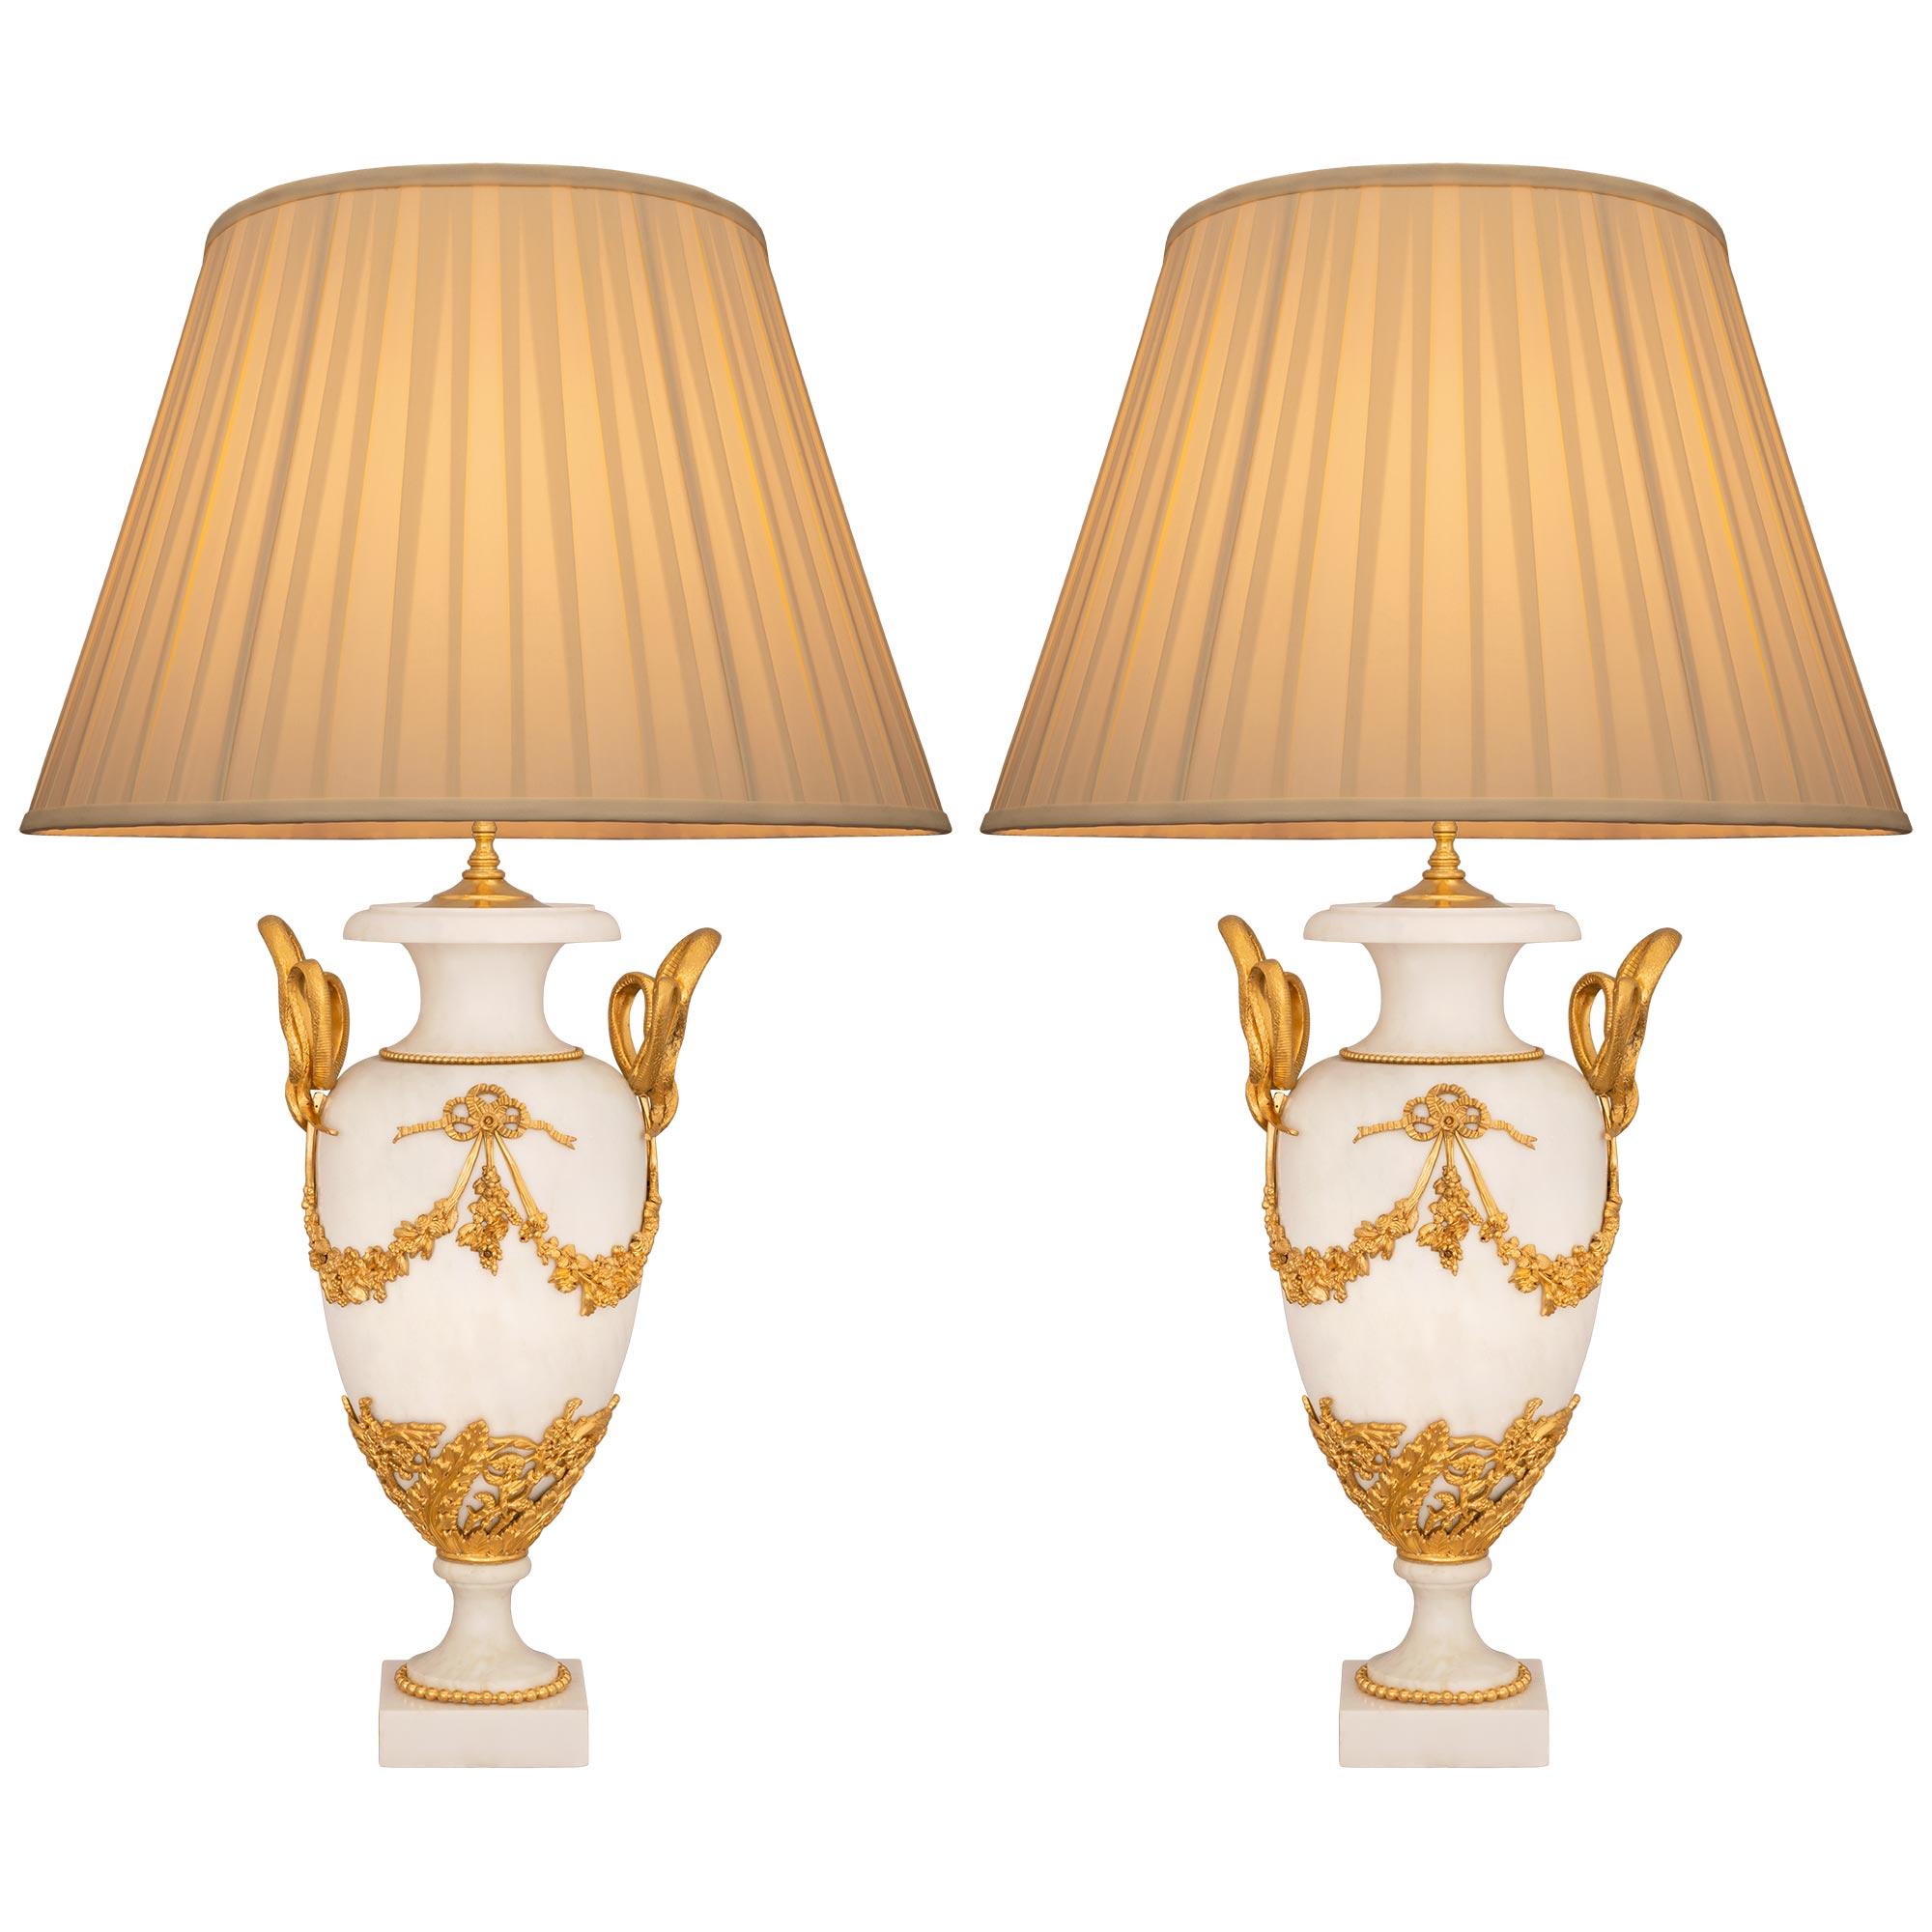 Pair of French 19th Century Louis XVI St. White Carrara Marble and Ormolu Lamps For Sale 5